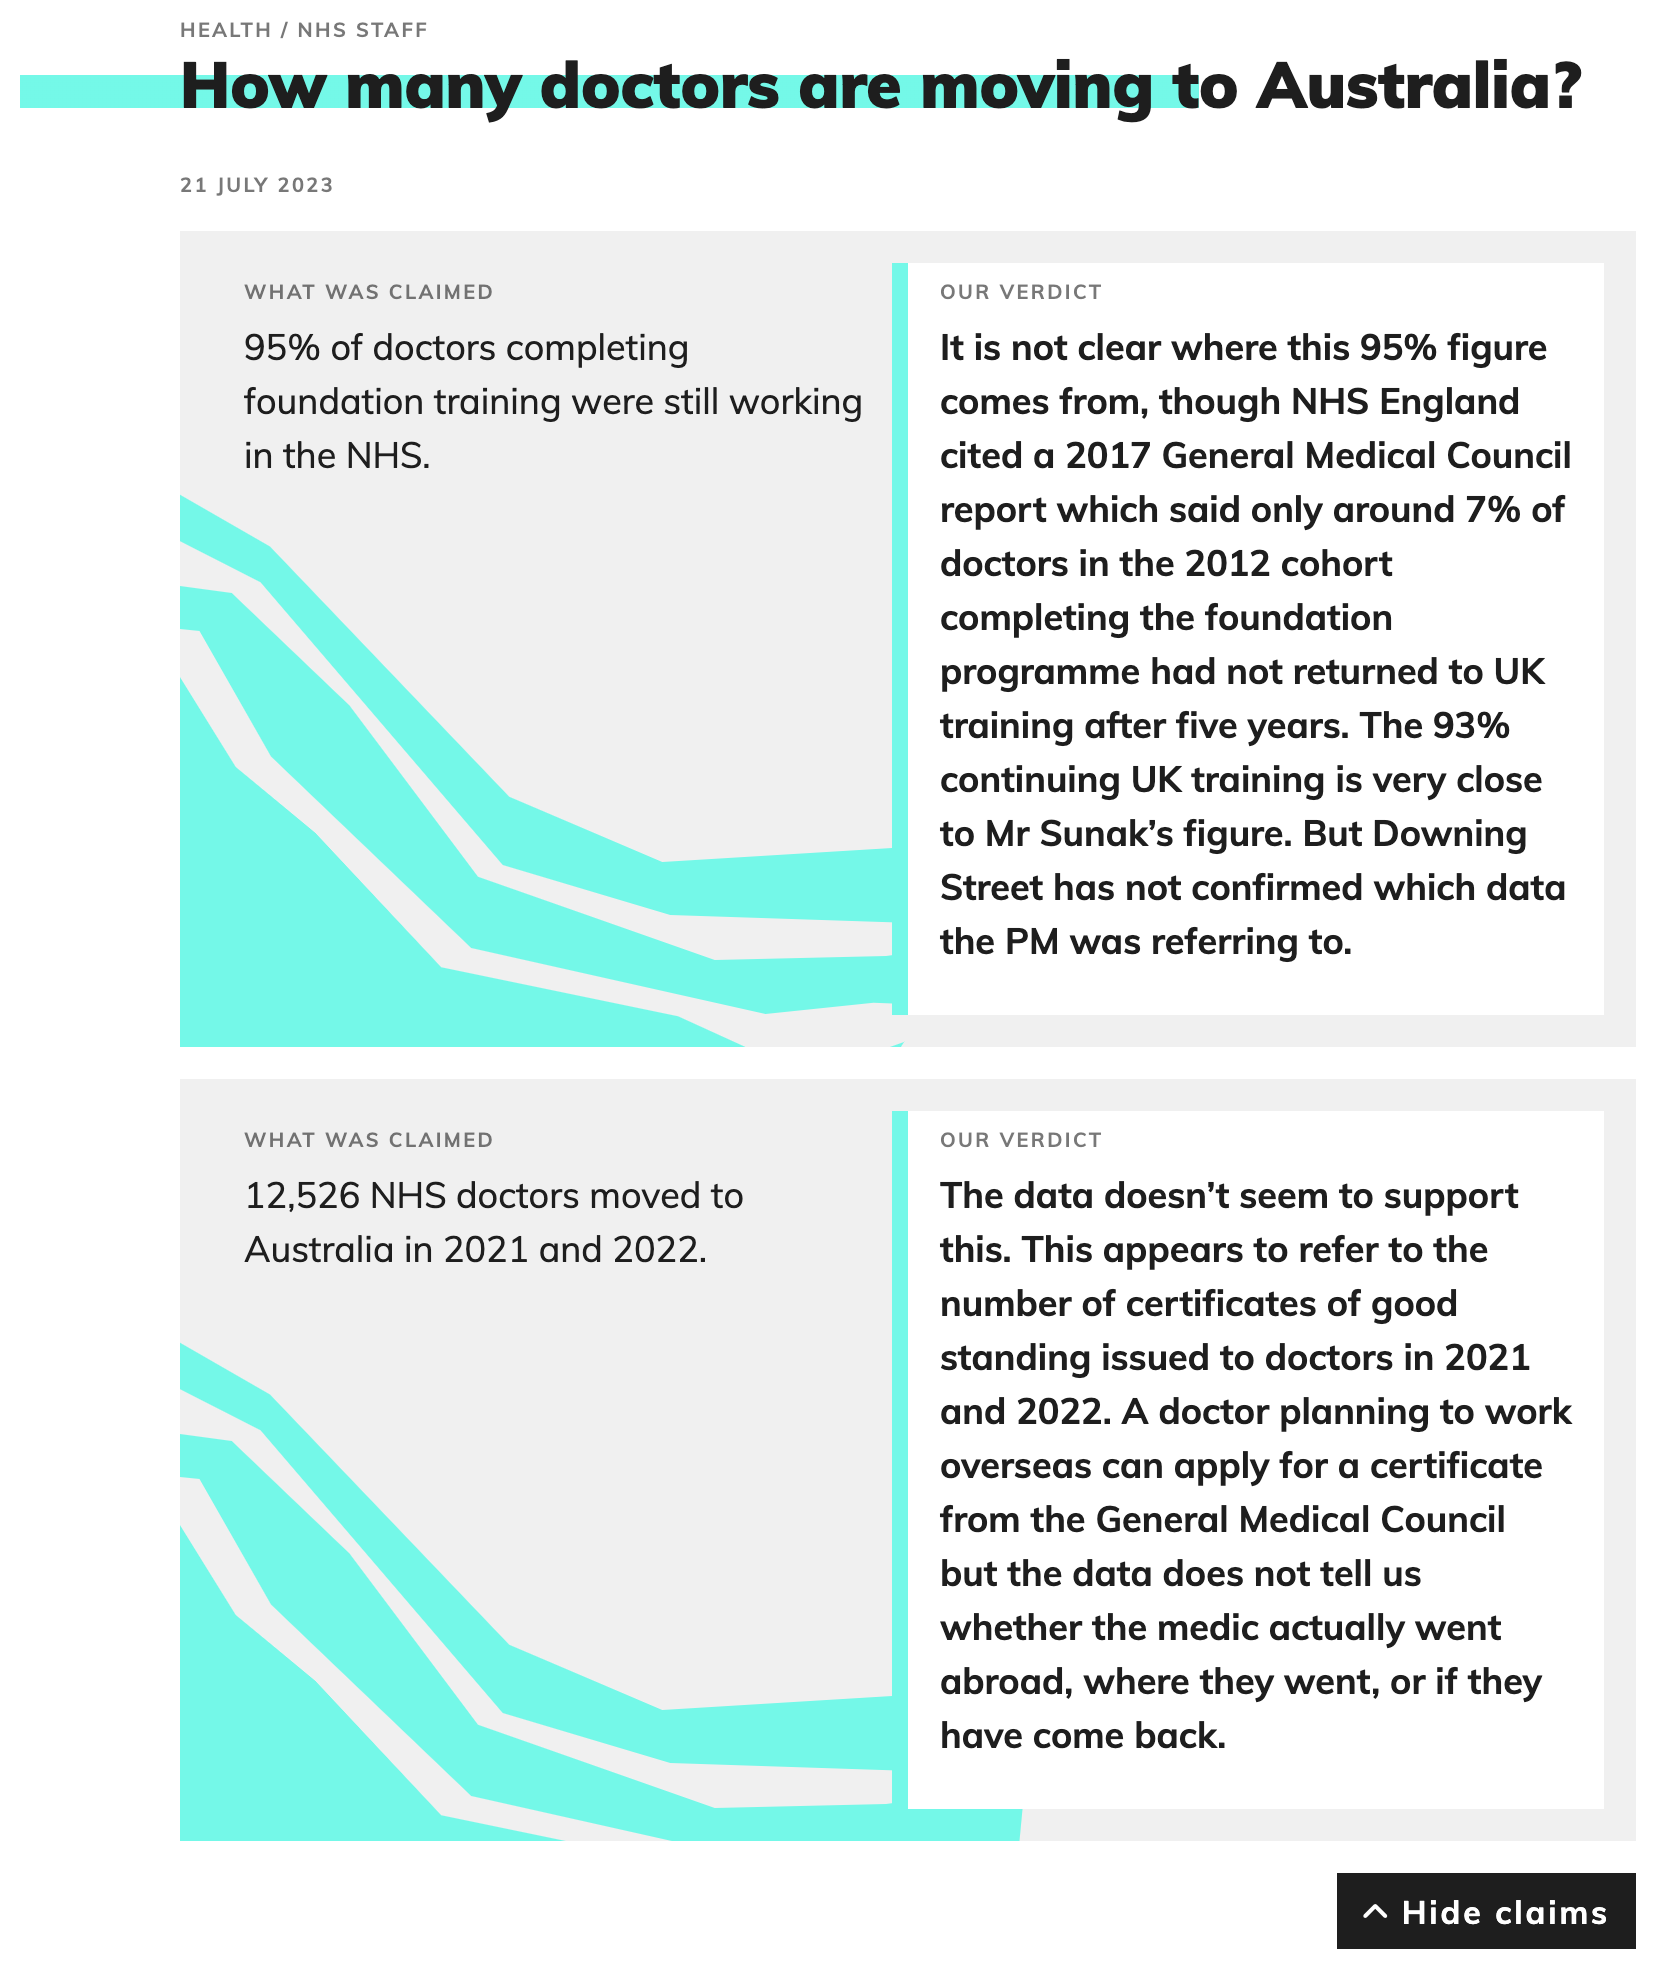 Screenshot of the post on Full Fact, asking, How many doctors are moving to Australia? Stating that The data doesn’t seem to support [the claim that 12,526 NHS doctors moved to Australia in 2021 and 2022, and that] This appears to refer to the number of certificates of good standing issued to doctors in 2021 and 2022. A doctor planning to work overseas can apply for a certificate from the General Medical Council but the data does not tell us whether the medic actually went abroad, where they went, or if they have come back.